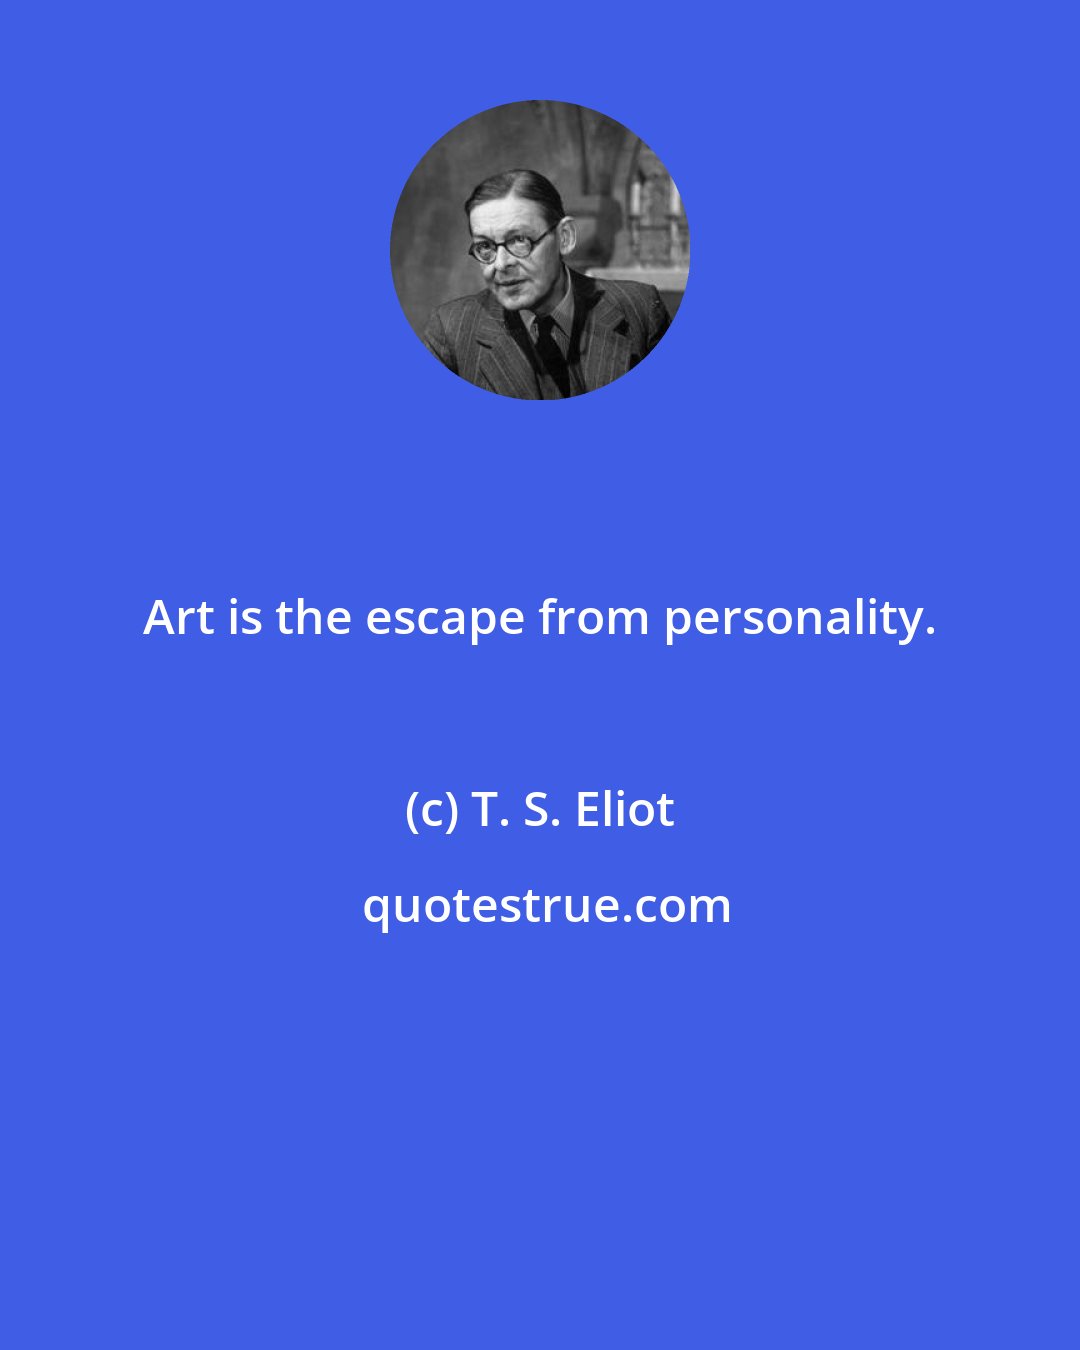 T. S. Eliot: Art is the escape from personality.